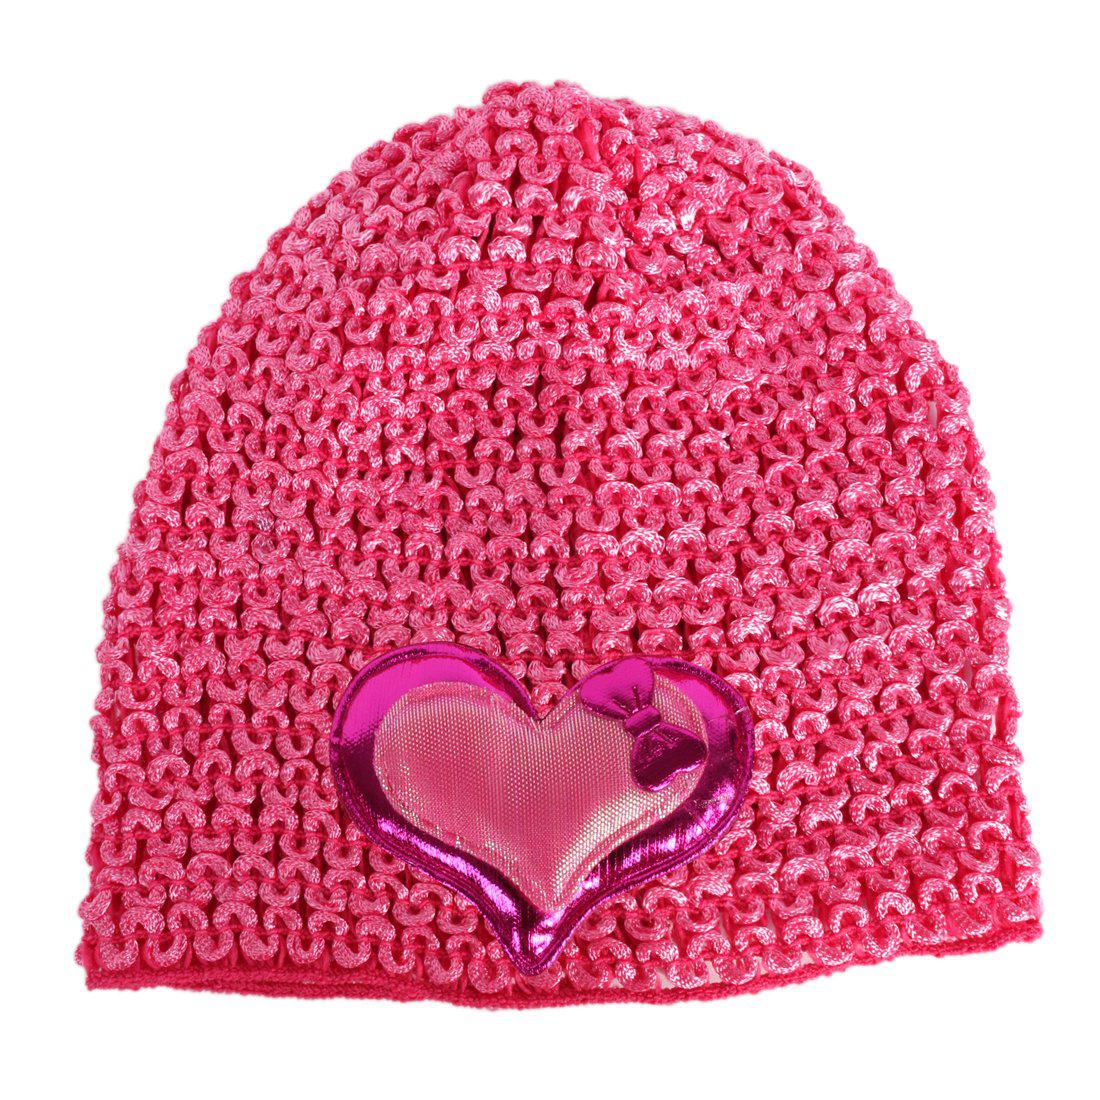 CROCHET SHIMMERY CAP WITH HEART CHARM